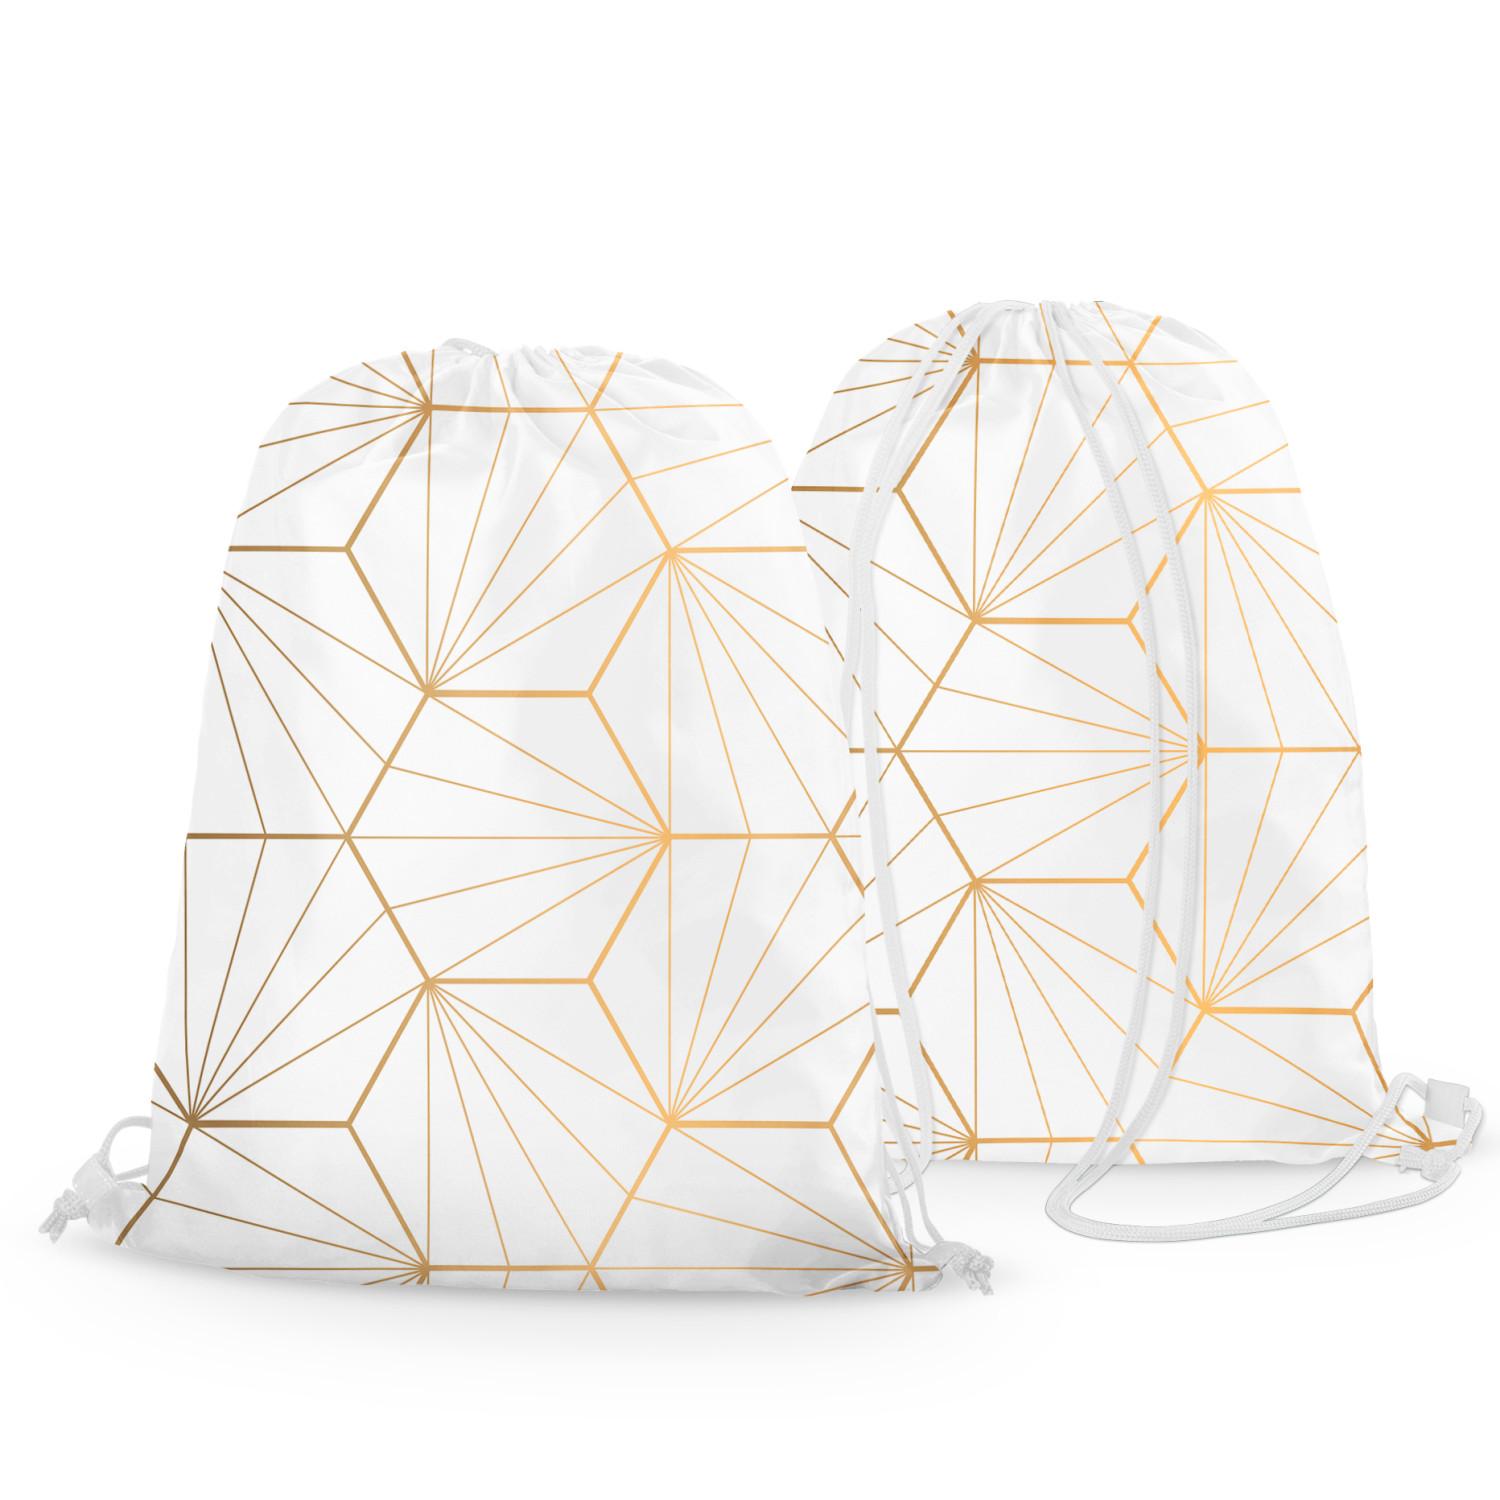 Backpack Gold hexagons - an abstract geometric glamour composition